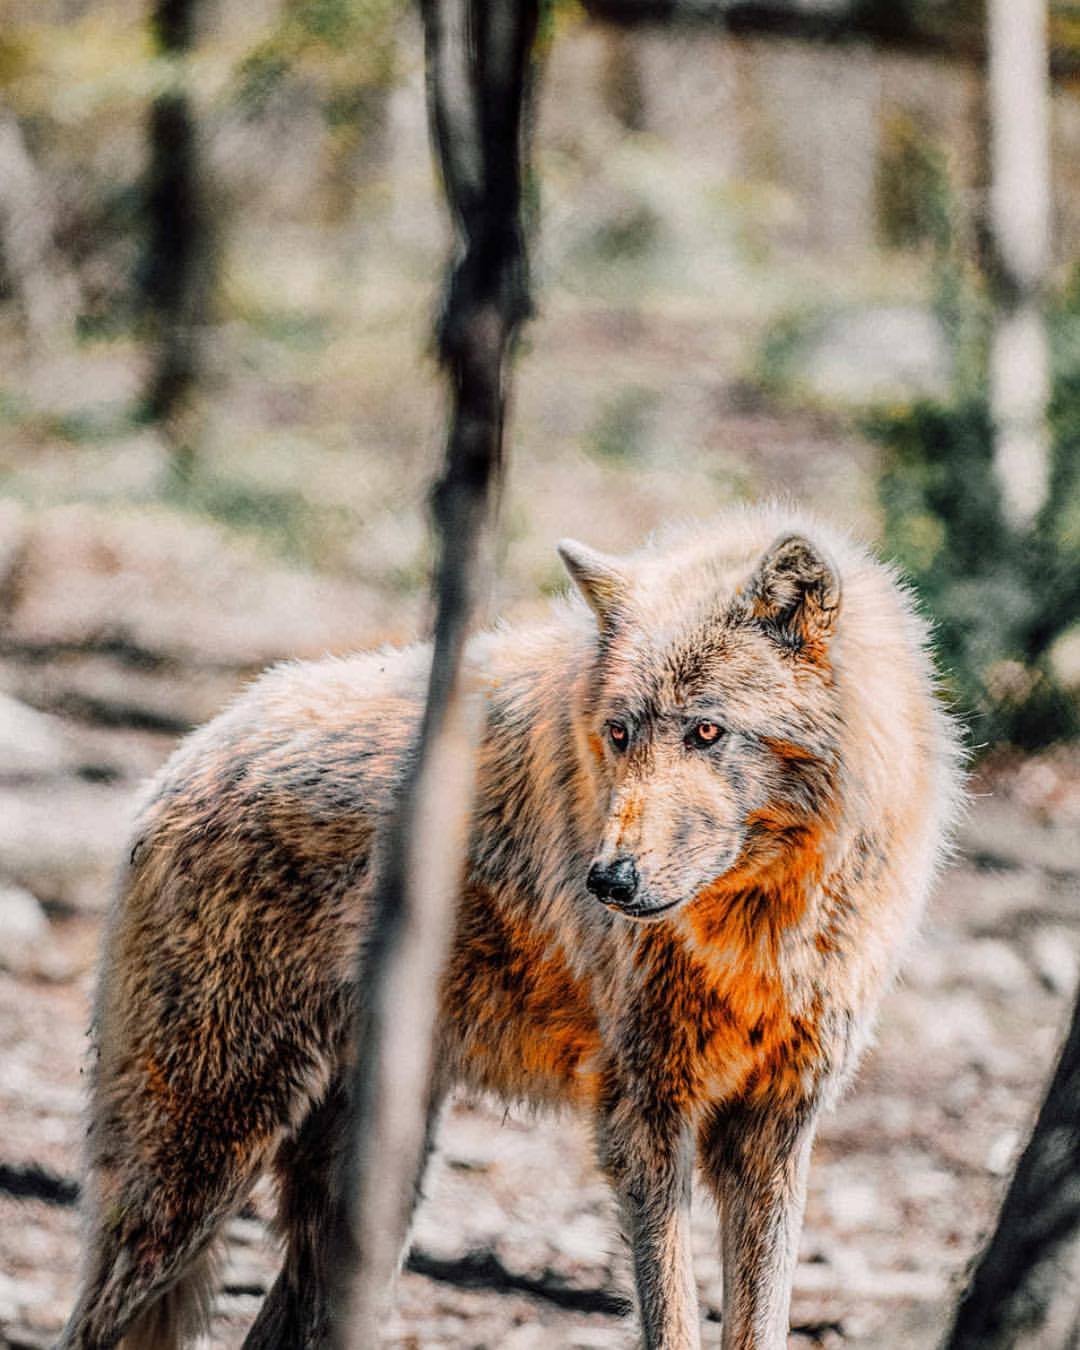 ~ By Dylan Colon ~
#wolves #photography
https://www.instagram.com/p/Bnw-mV-Hlwi/?utm_source=ig_tumblr_share&igshid=xn1on2bqfhww